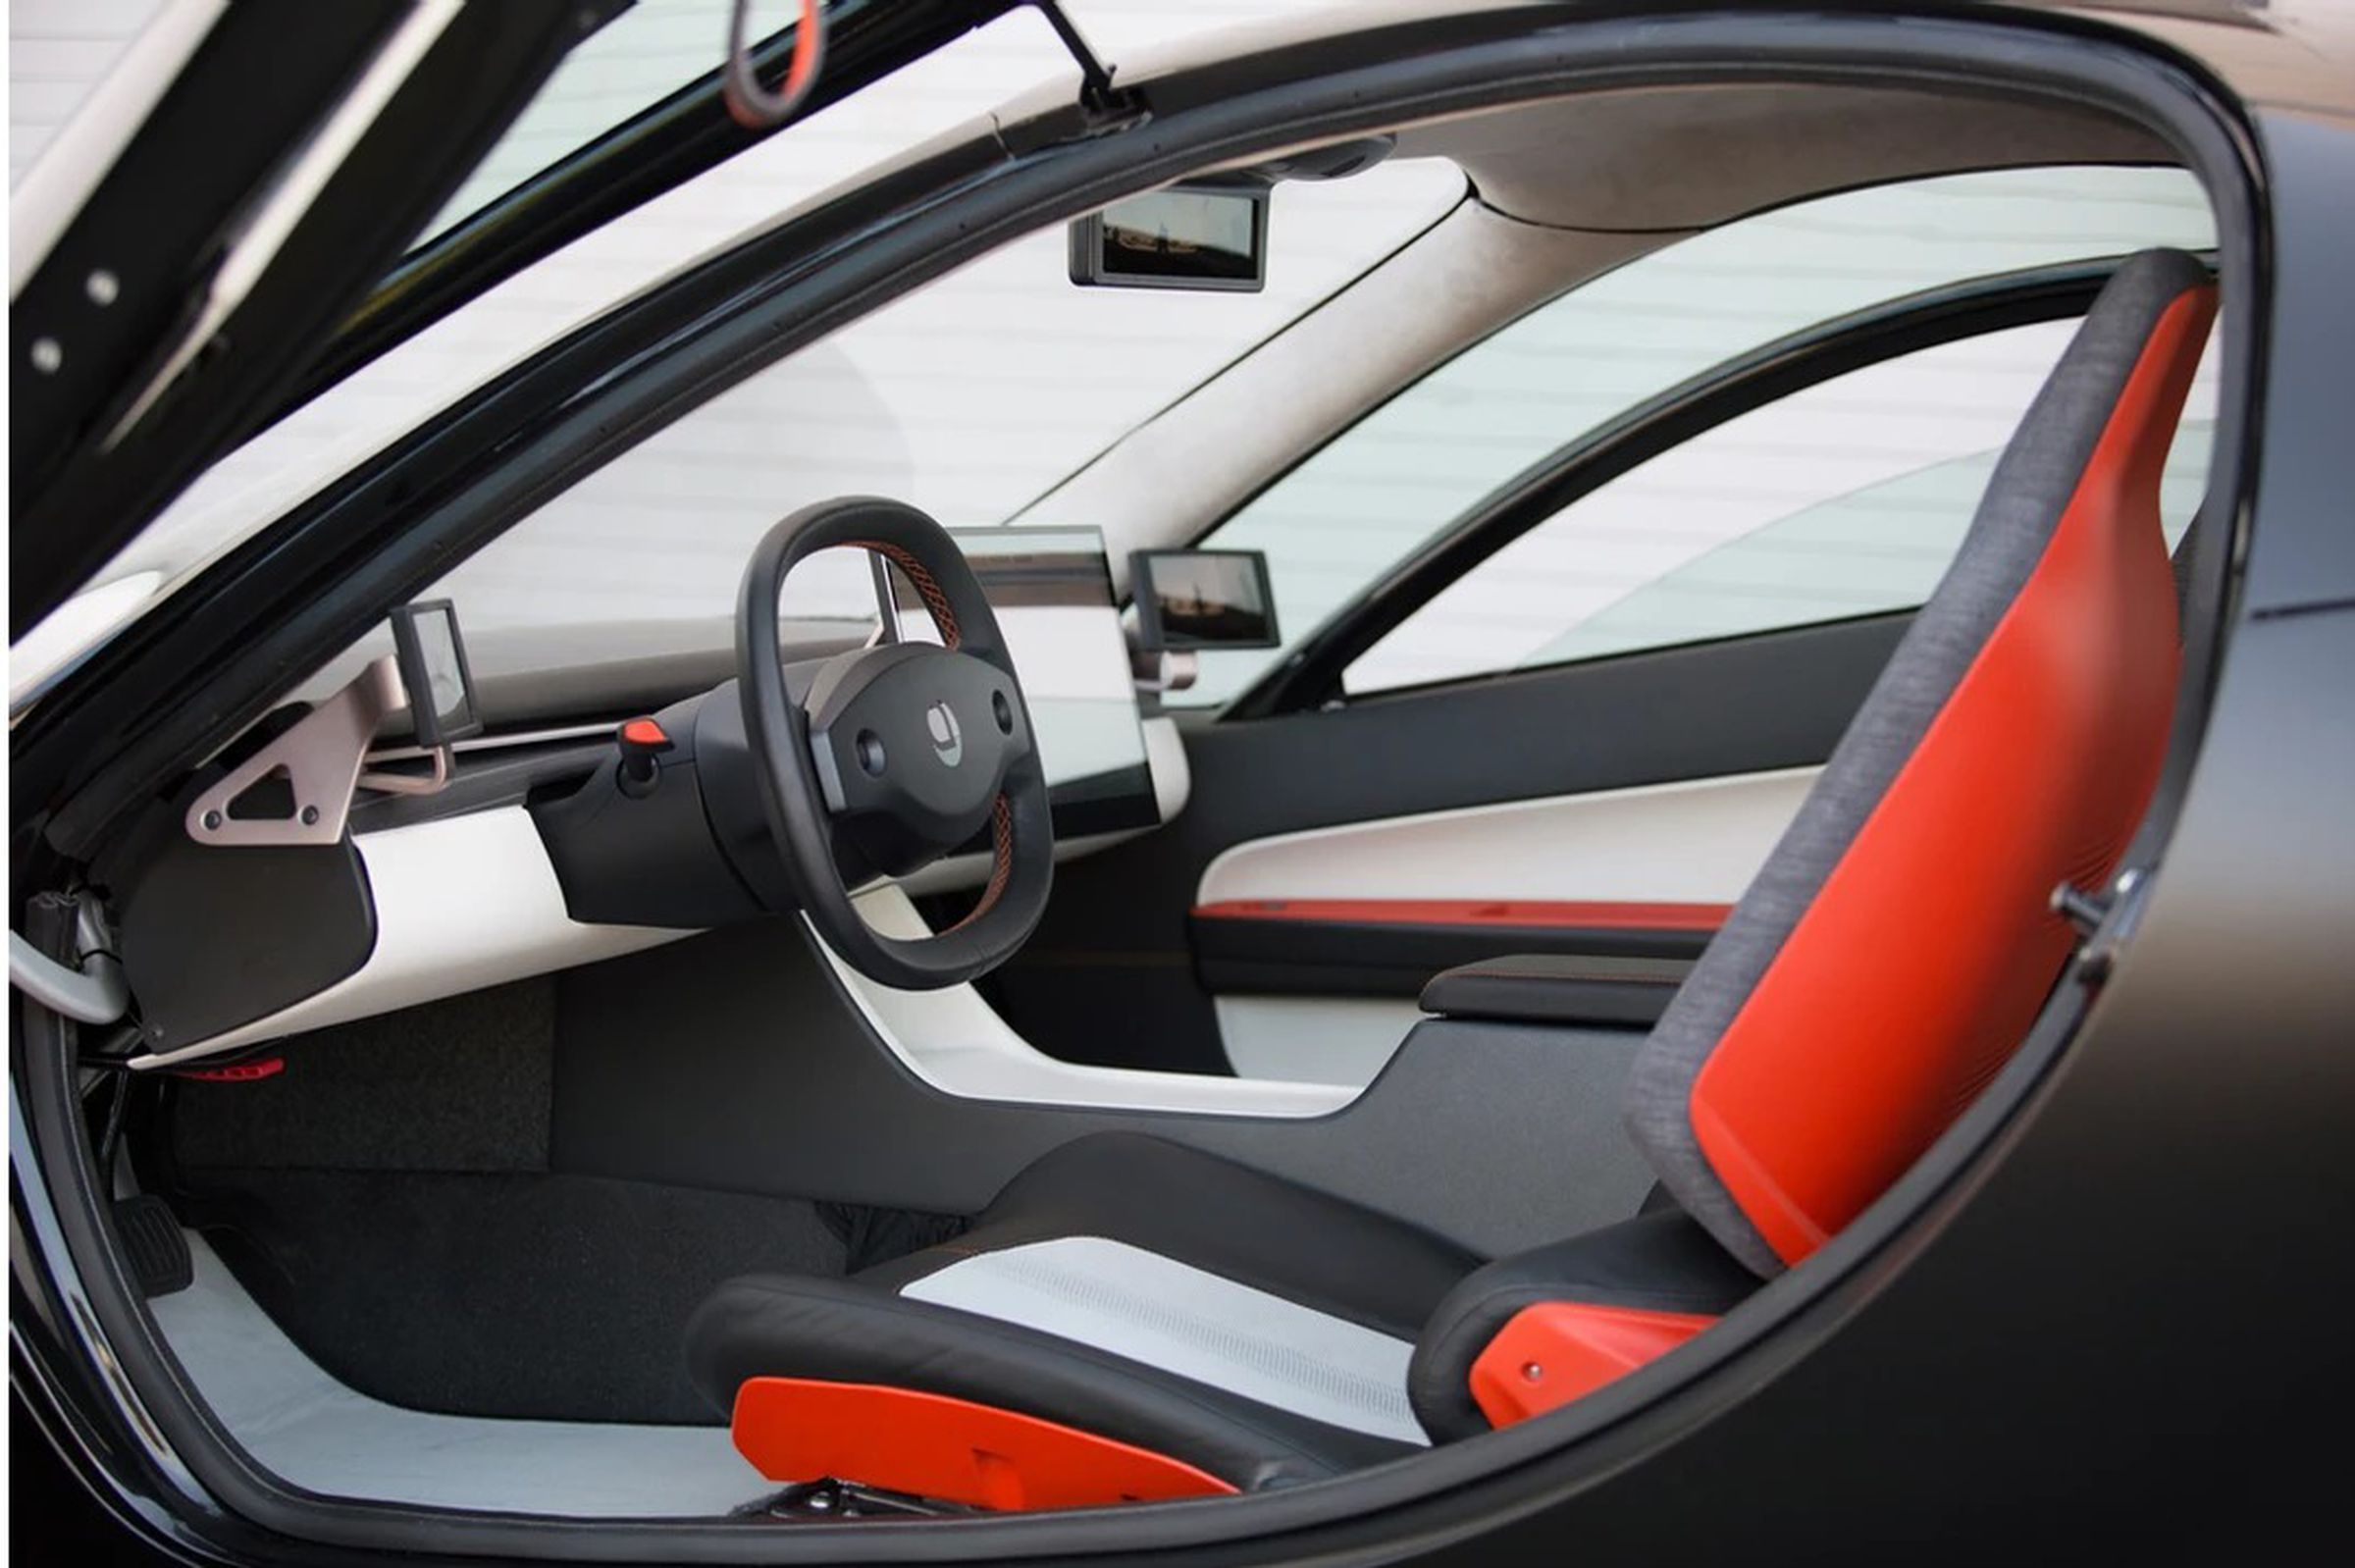 The interior of Aptera’s new electric vehicle